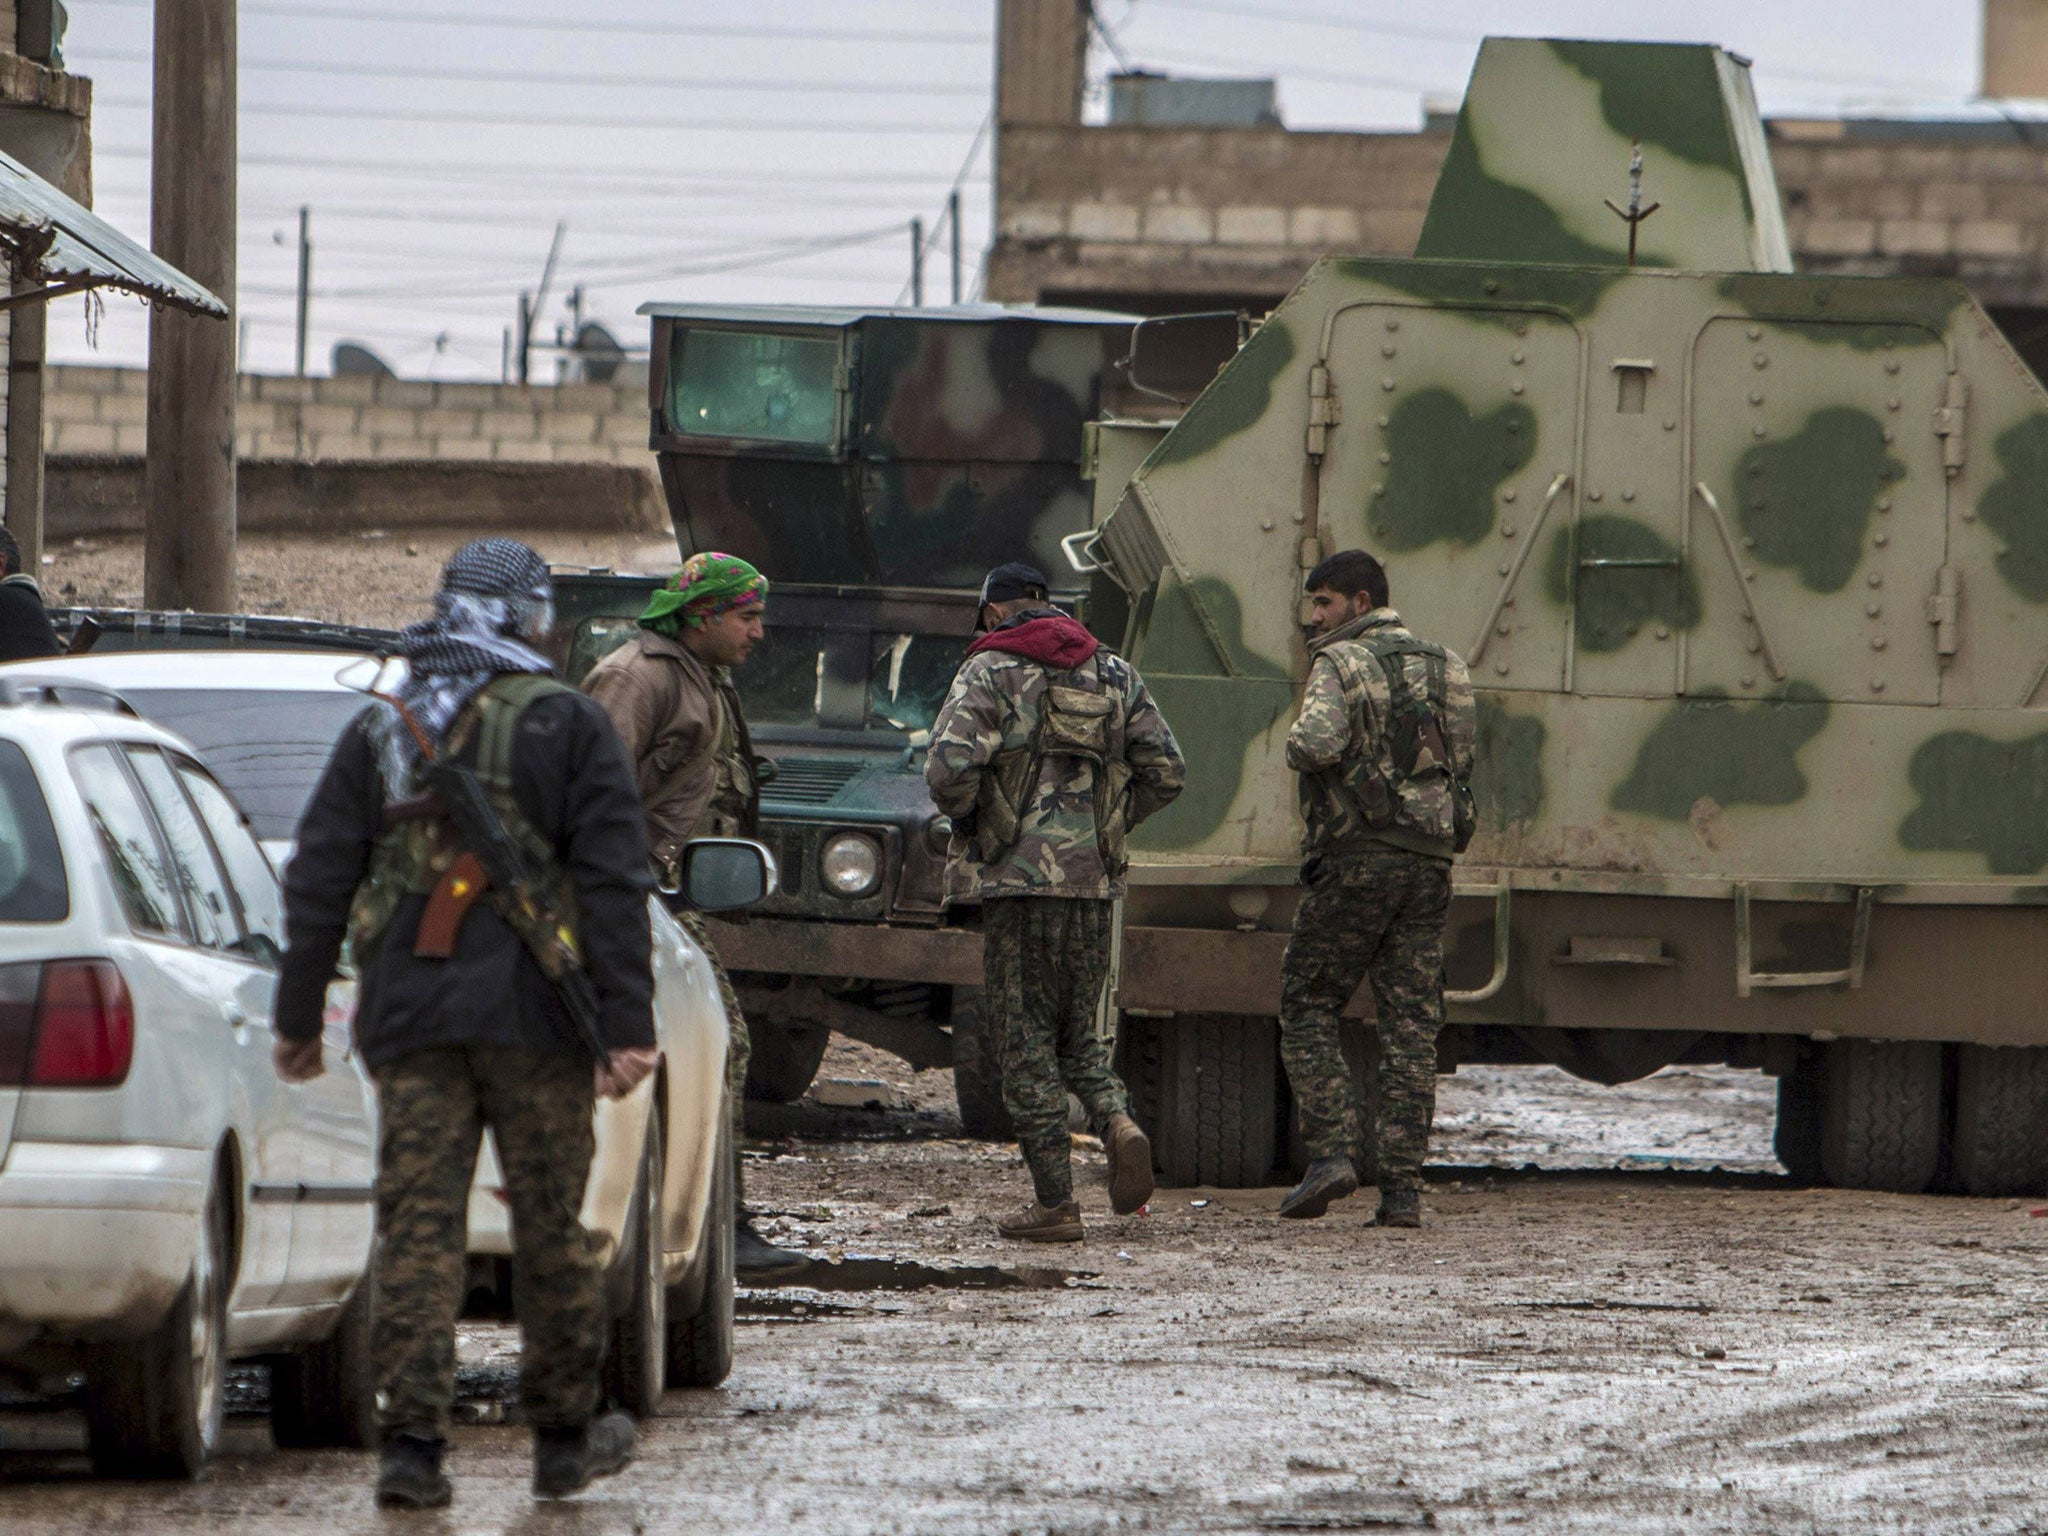 Fighters of the Kurdish People's Protection Units (YPG) walk past an armored vehicle along a street in the town of Tel Tamr February 25, 2015